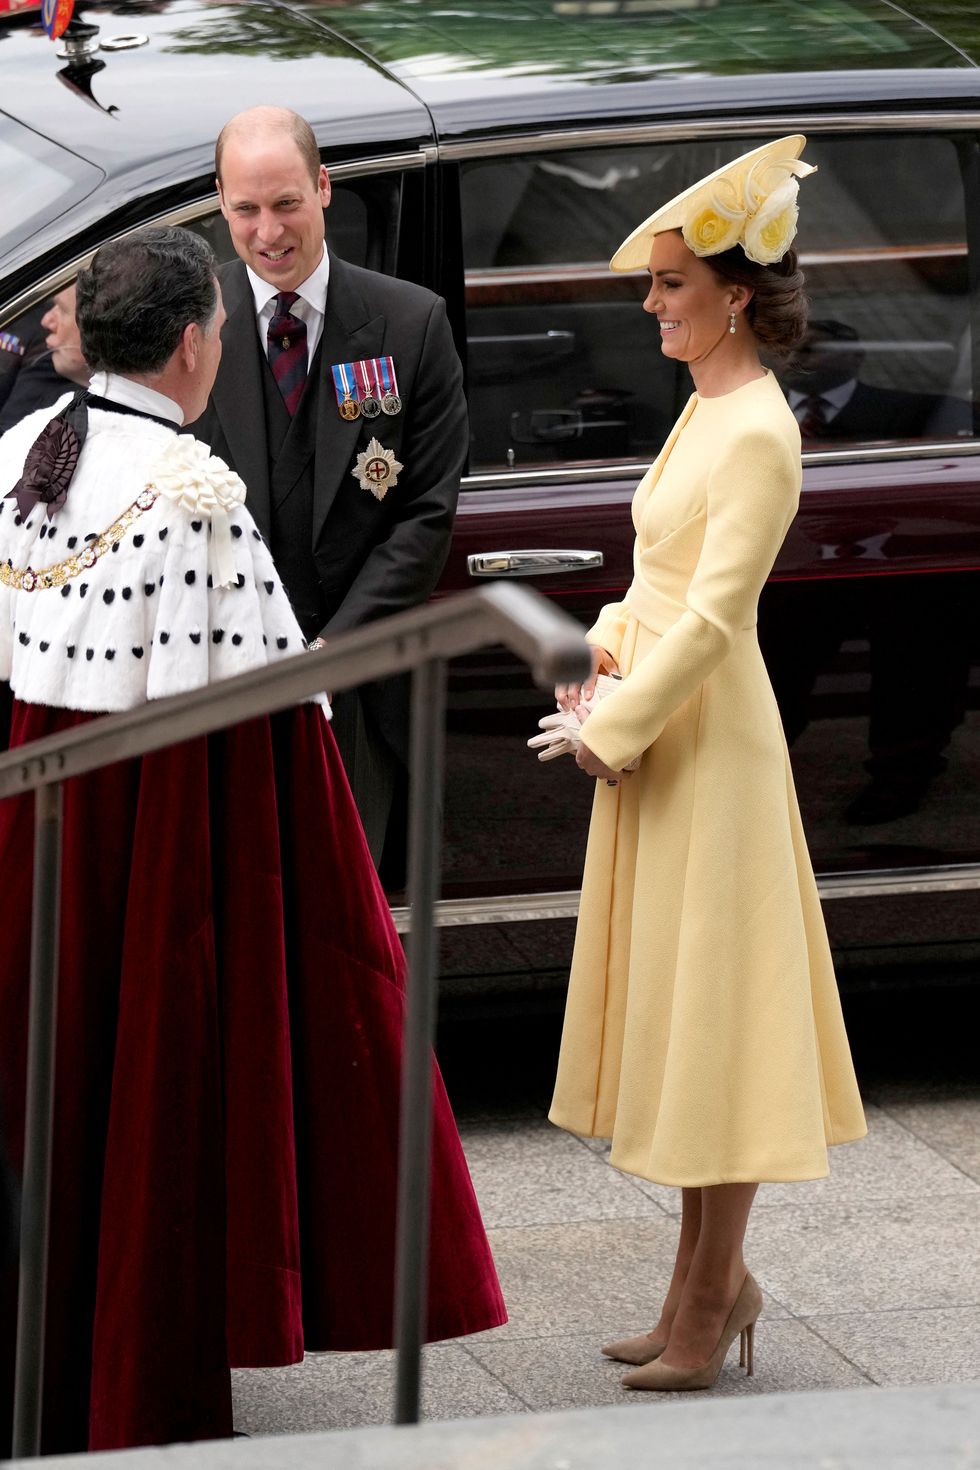 britains prince william, duke of cambridge, and his wife britains catherine, duchess of cambridge, arrive to attend the national service of thanksgiving for the queens reign at saint pauls cathedral in london on june 3, 2022 as part of queen elizabeth iis platinum jubilee celebrations   queen elizabeth ii kicked off the first of four days of celebrations marking her record breaking 70 years on the throne, to cheering crowds of tens of thousands of people but the 96 year old sovereigns appearance at the platinum jubilee    a milestone never previously reached by a british monarch    took its toll, forcing her to pull out of a planned church service photo by matt dunham  pool  afp photo by matt dunhampoolafp via getty images